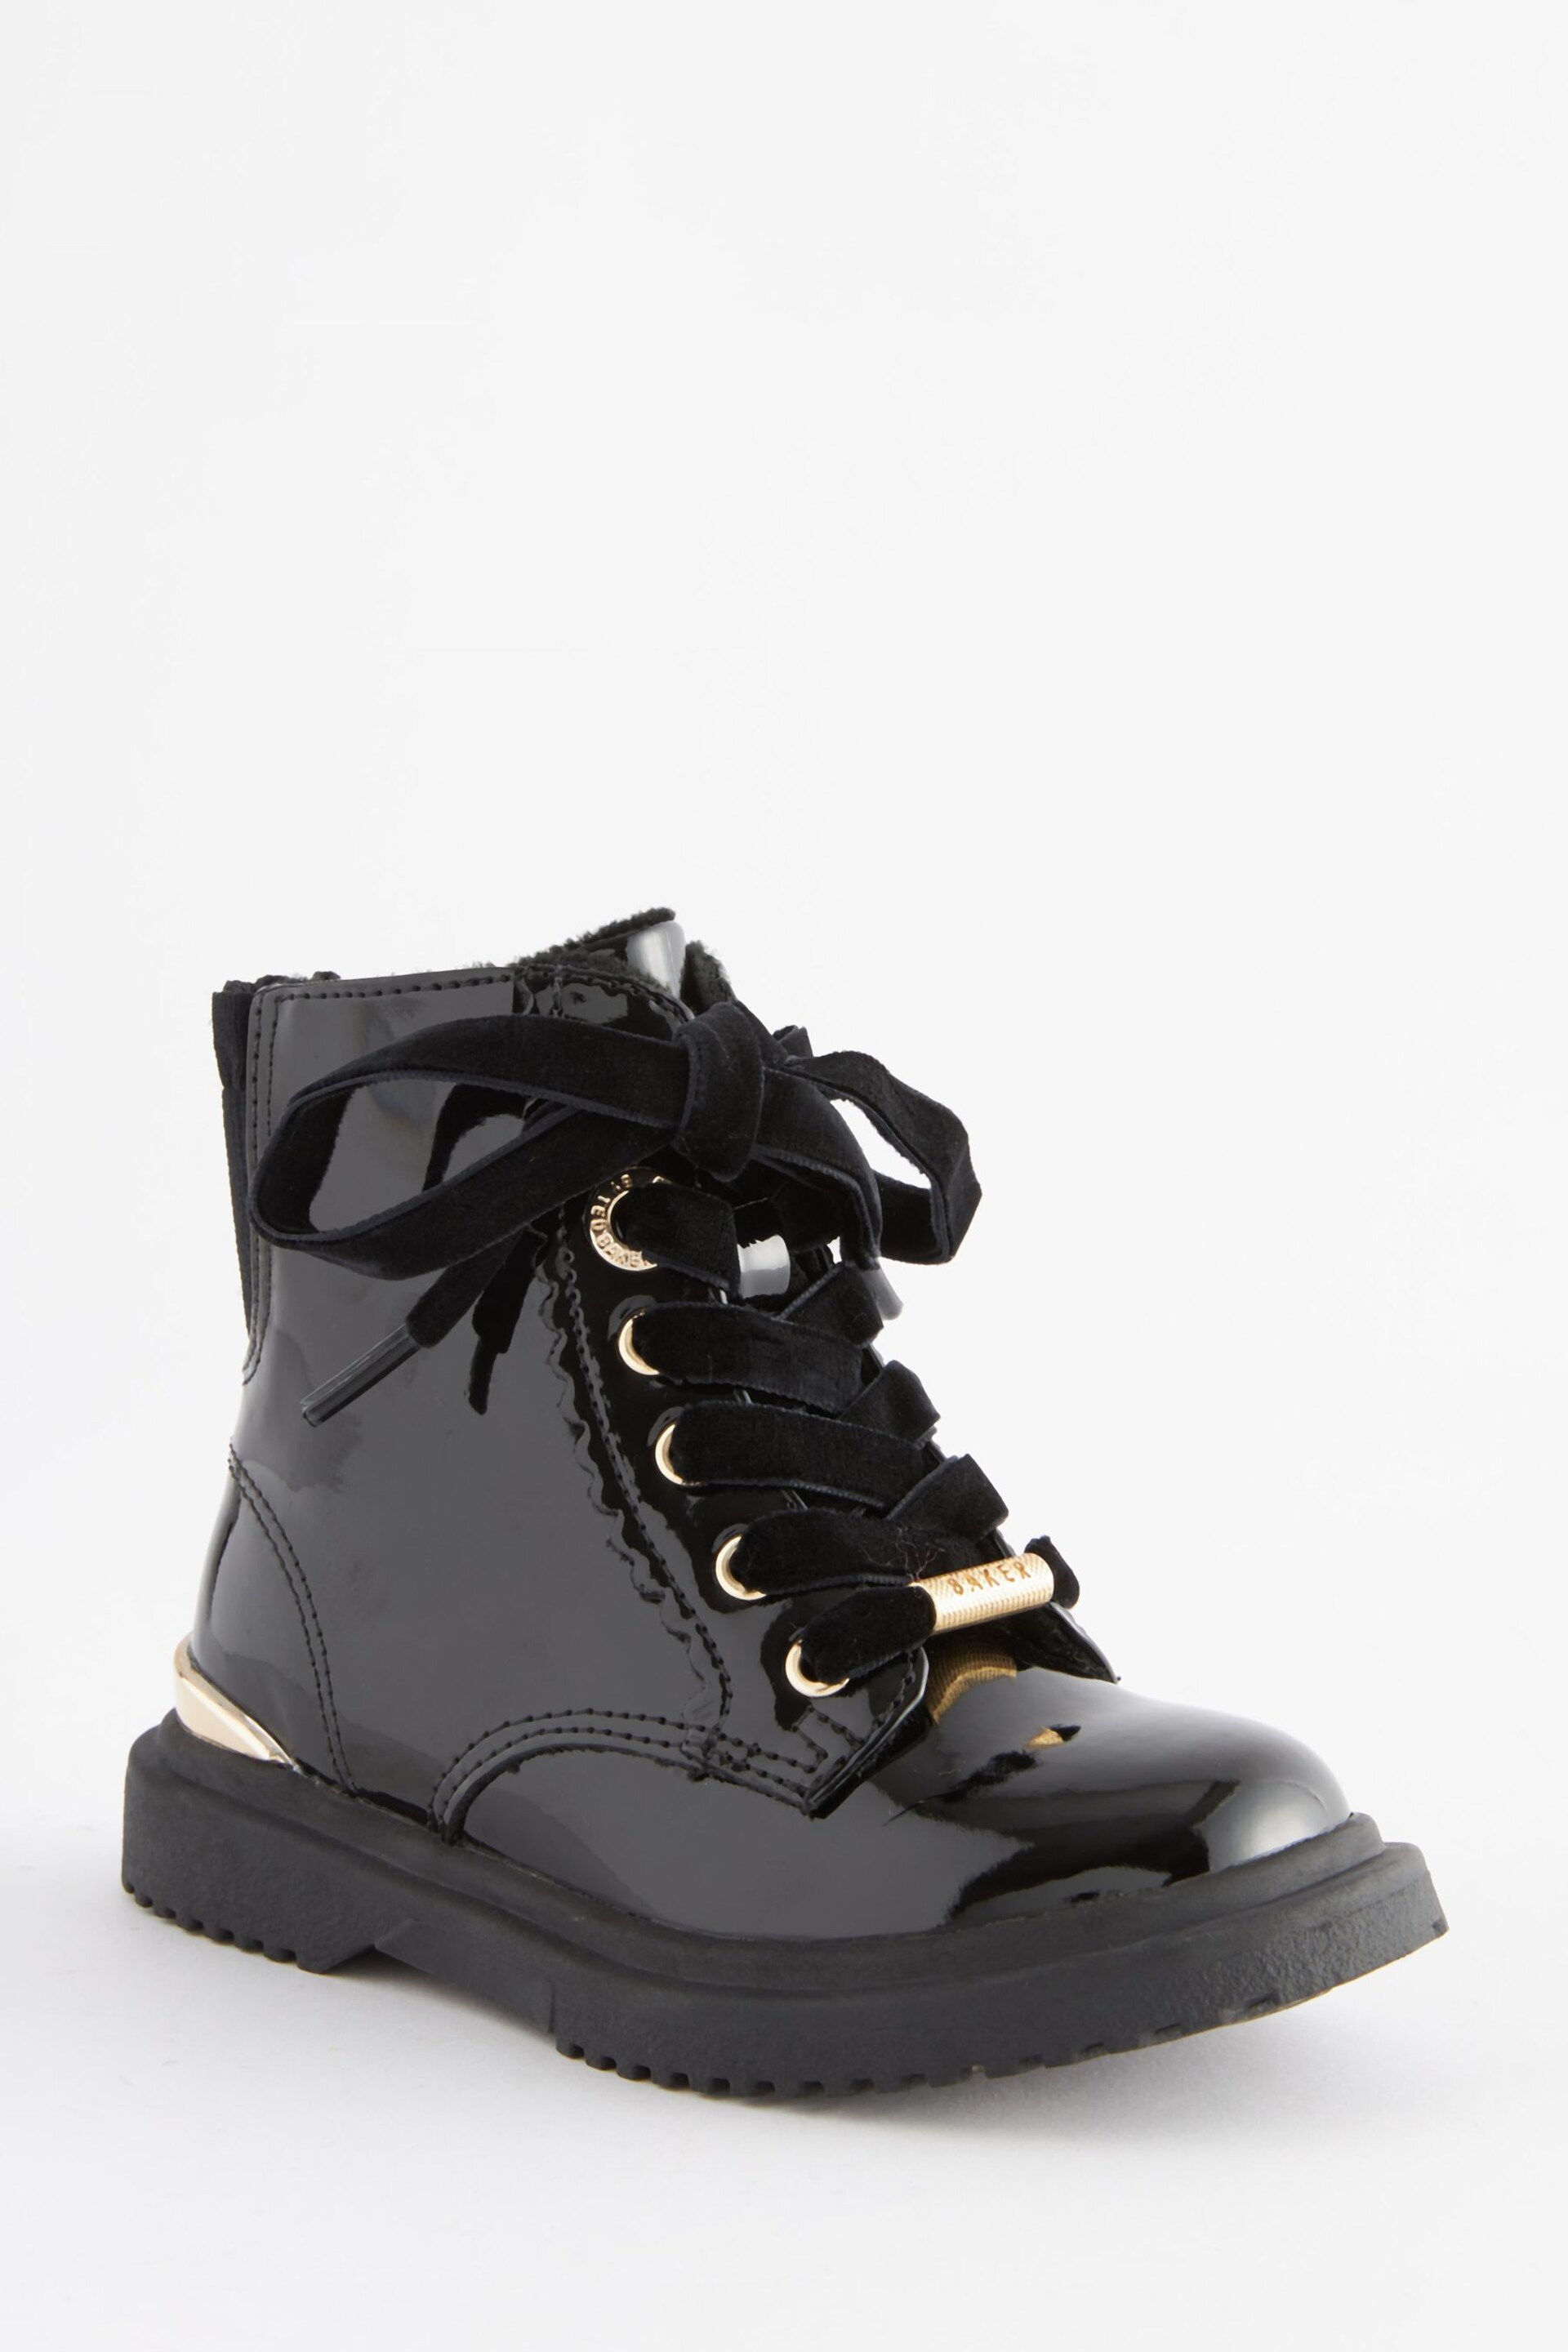 Baker by Ted Baker Girls Patent Lace Up Black Boots - Image 2 of 6